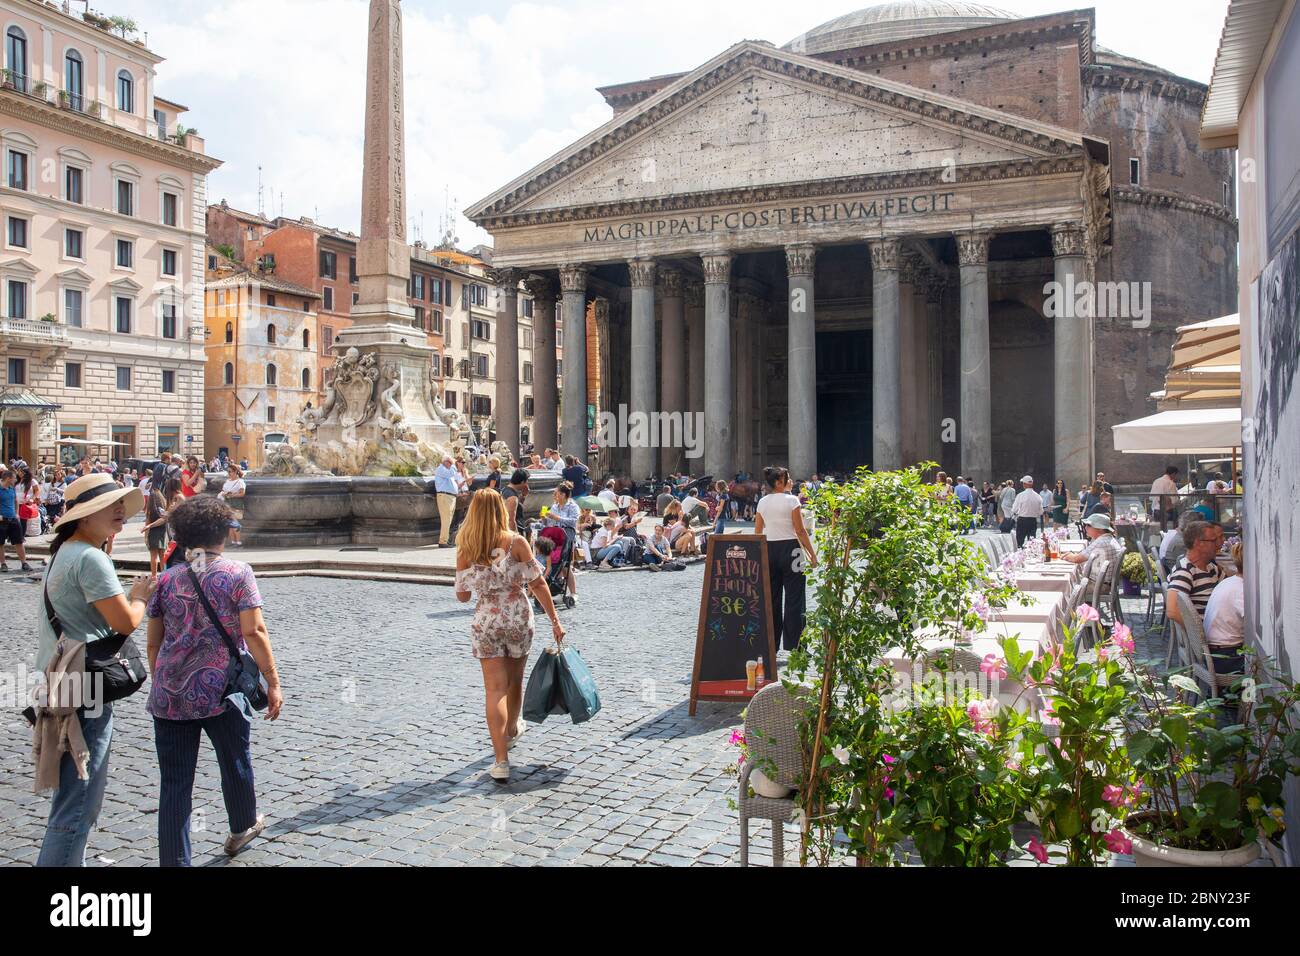 The Pantheon building and cobbled streets square, centre of Rome,Italy on a spring day Stock Photo